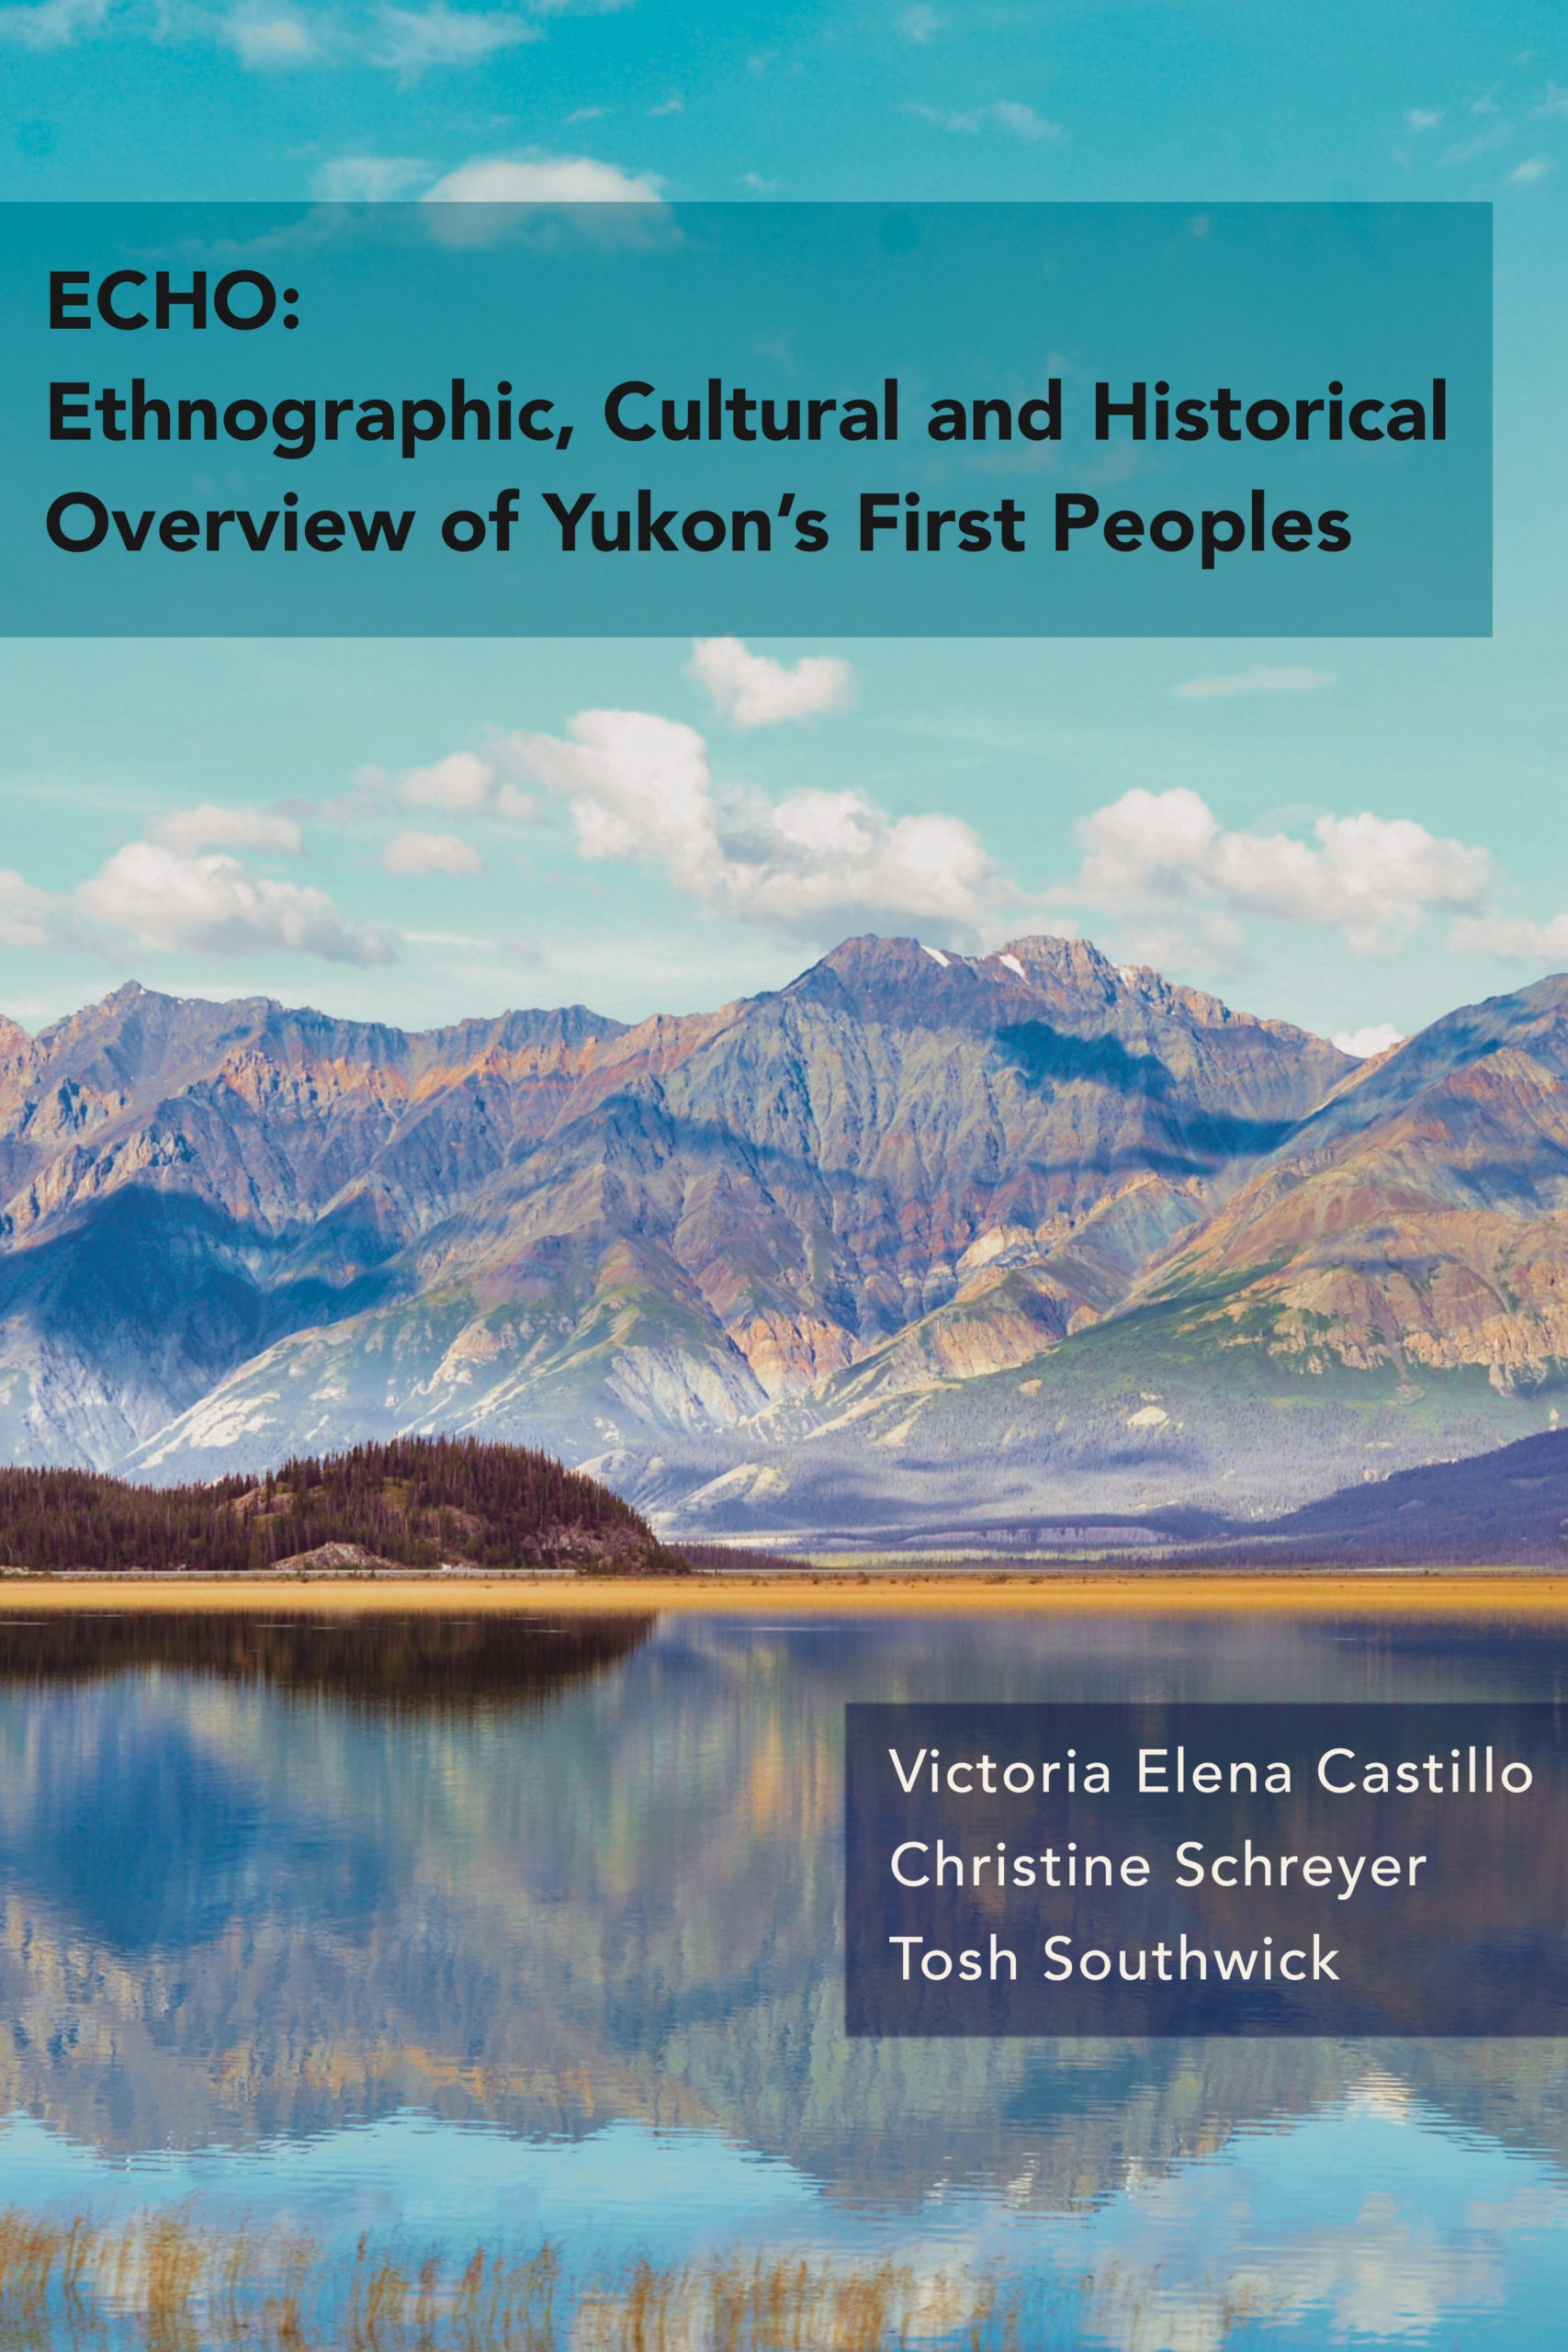 UBC Press  The First Nations of British Columbia, Third Edition - An  Anthropological Overview, By Robert J. Muckle